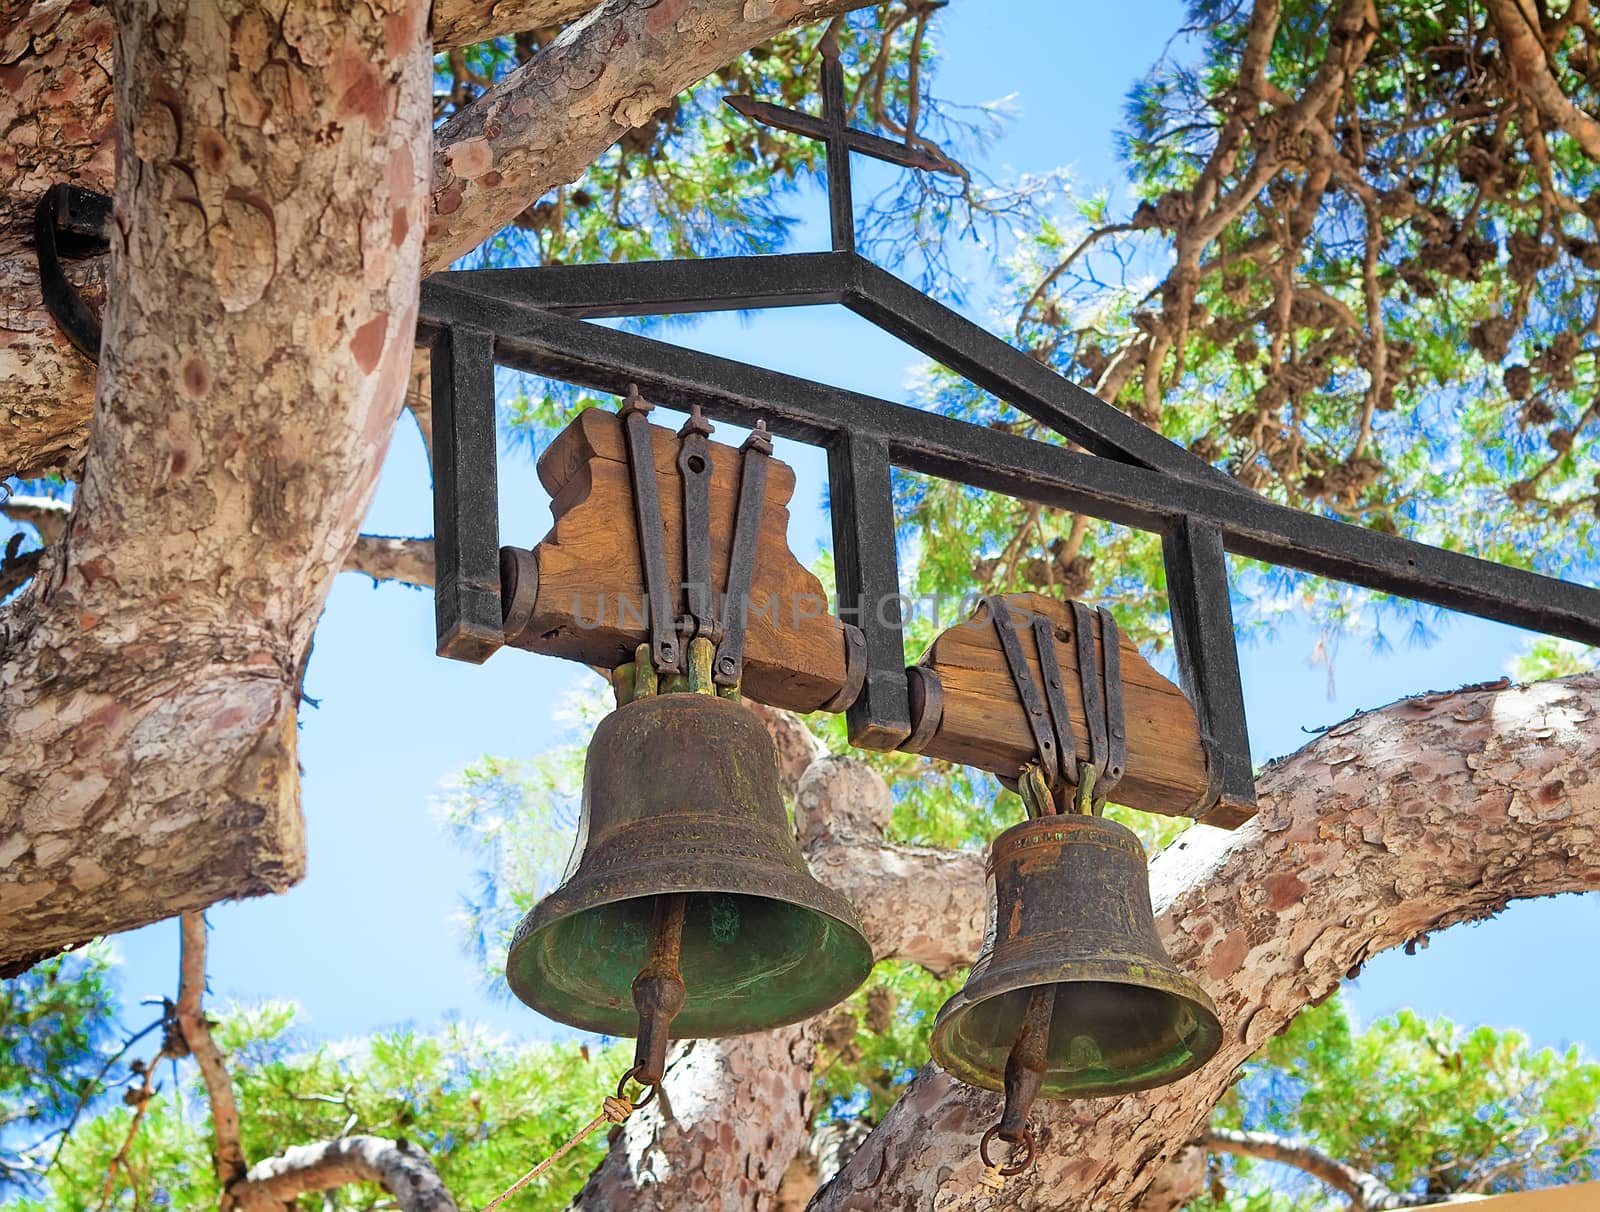 Two ancient bells in the Orthodox monastery of Preveli, Crete, Greece. Located on the branches of the old tree.